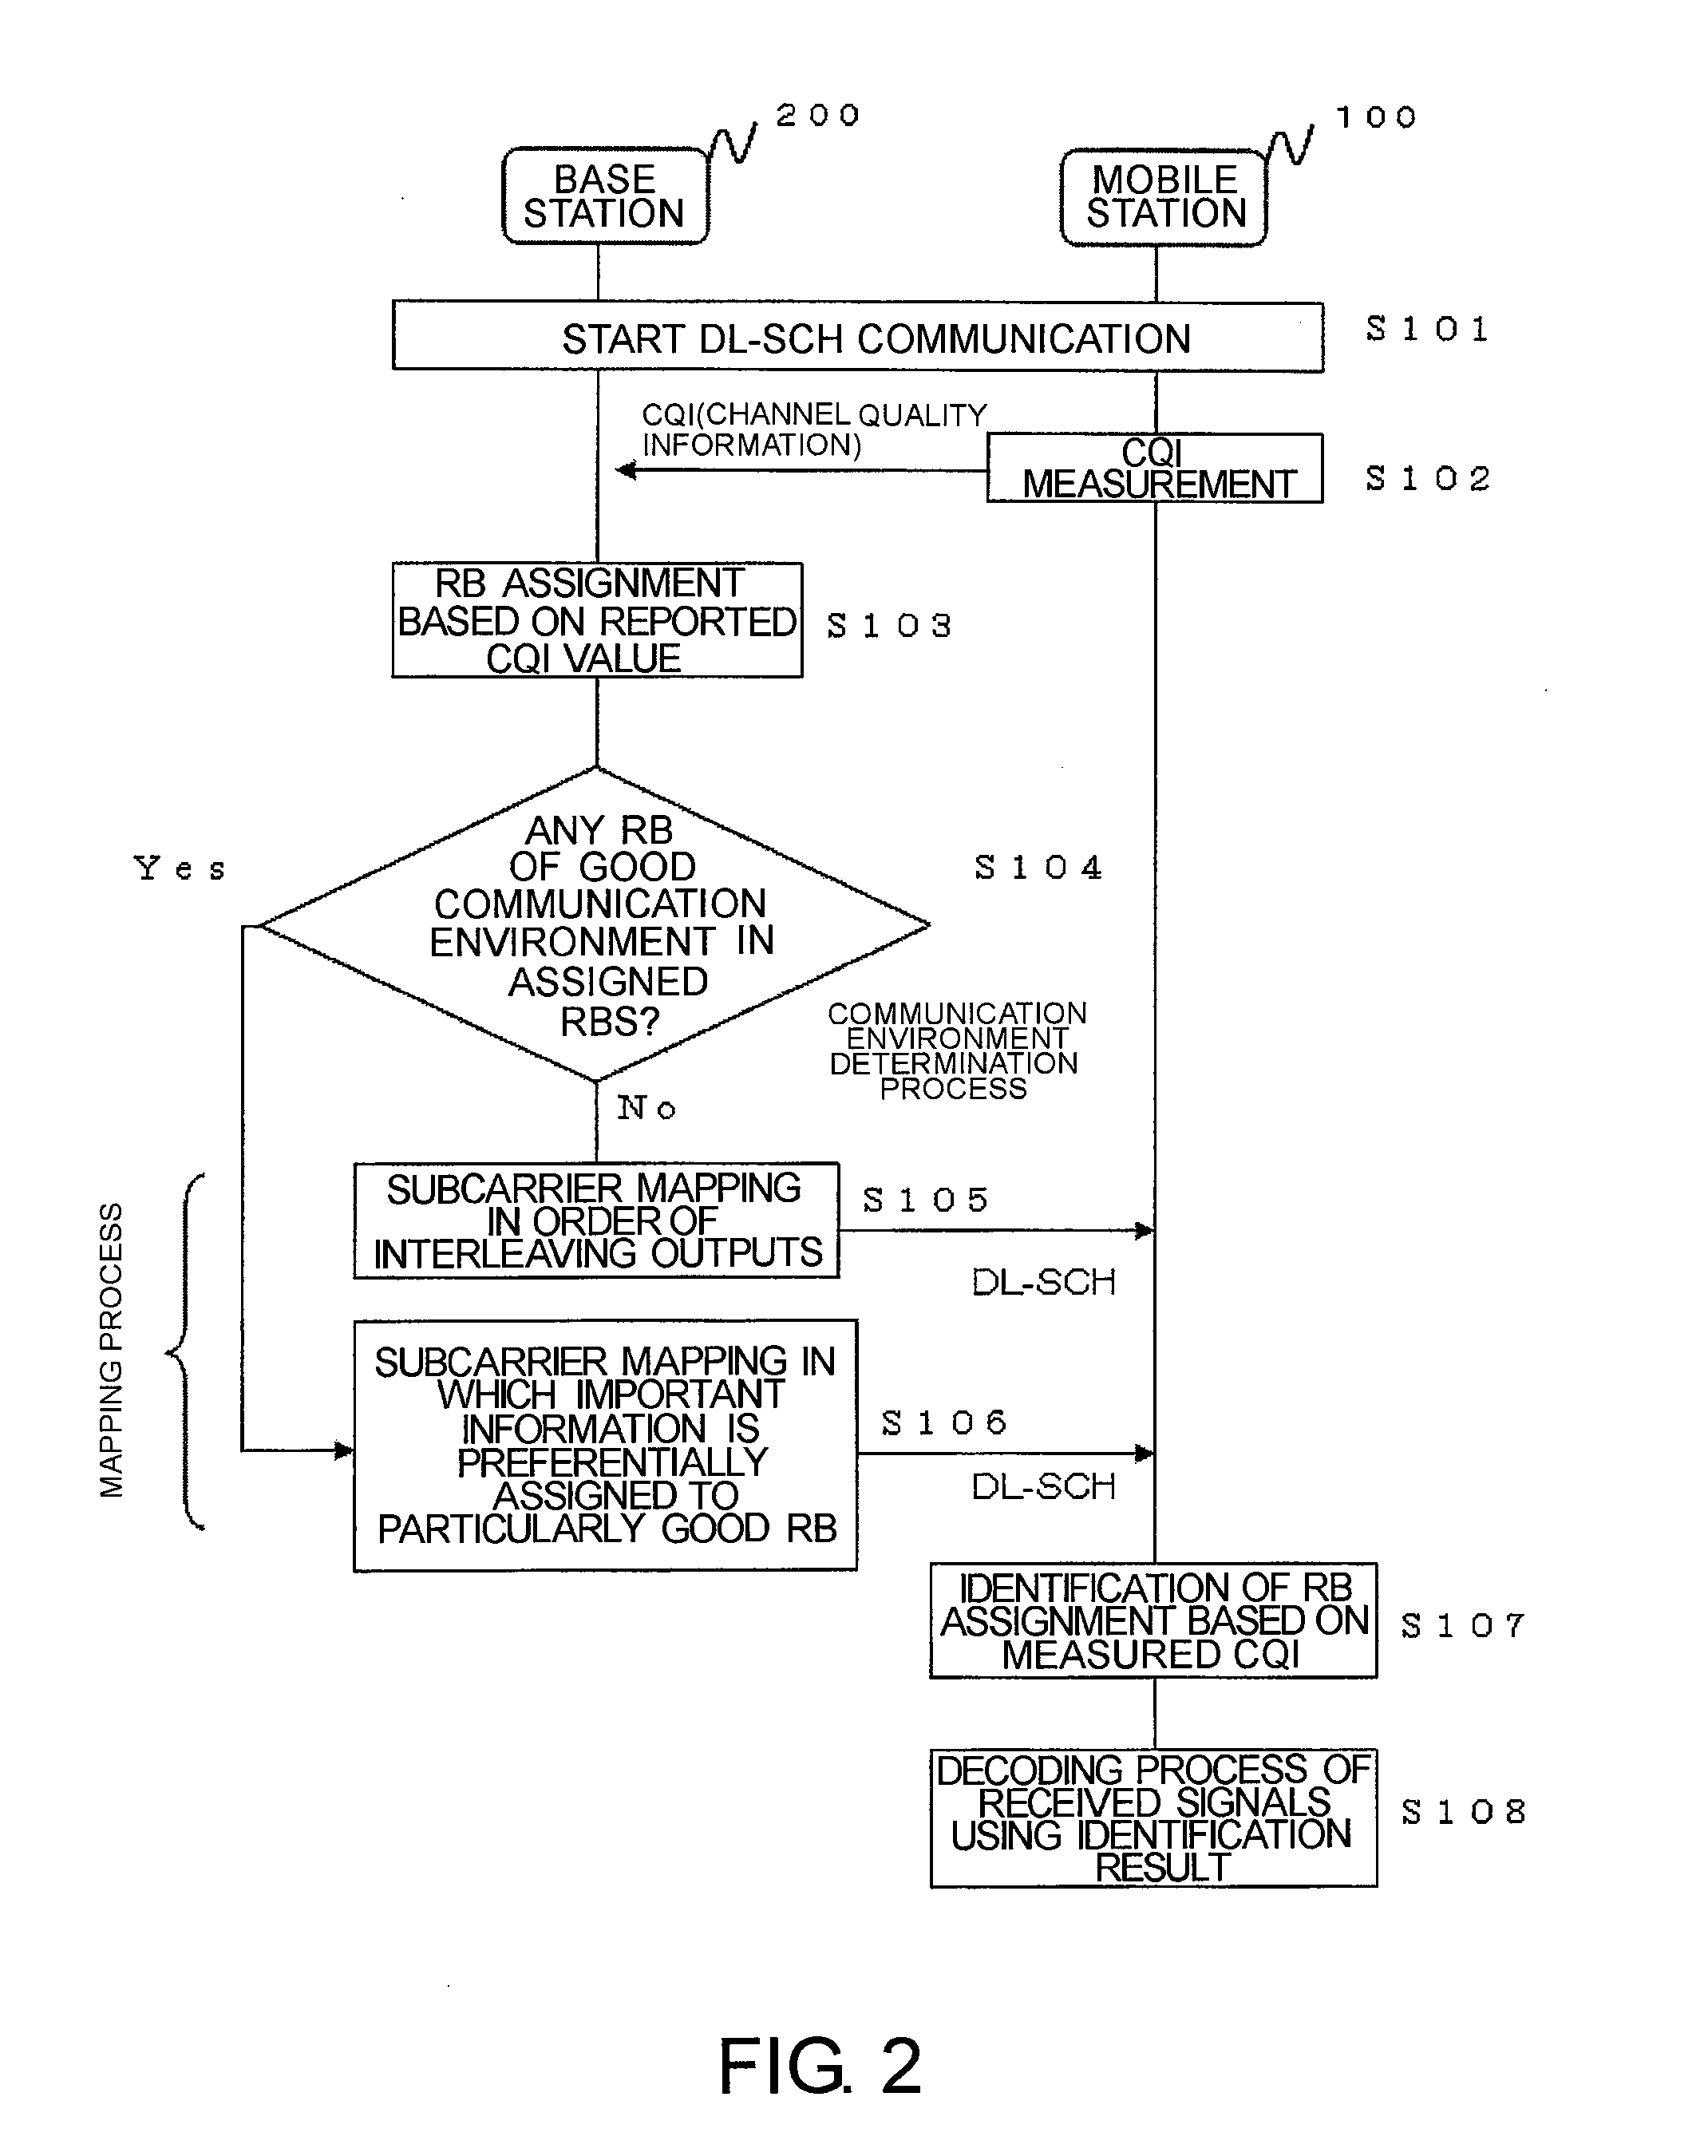 Base station, mobile station, and mapping method of subcarriers